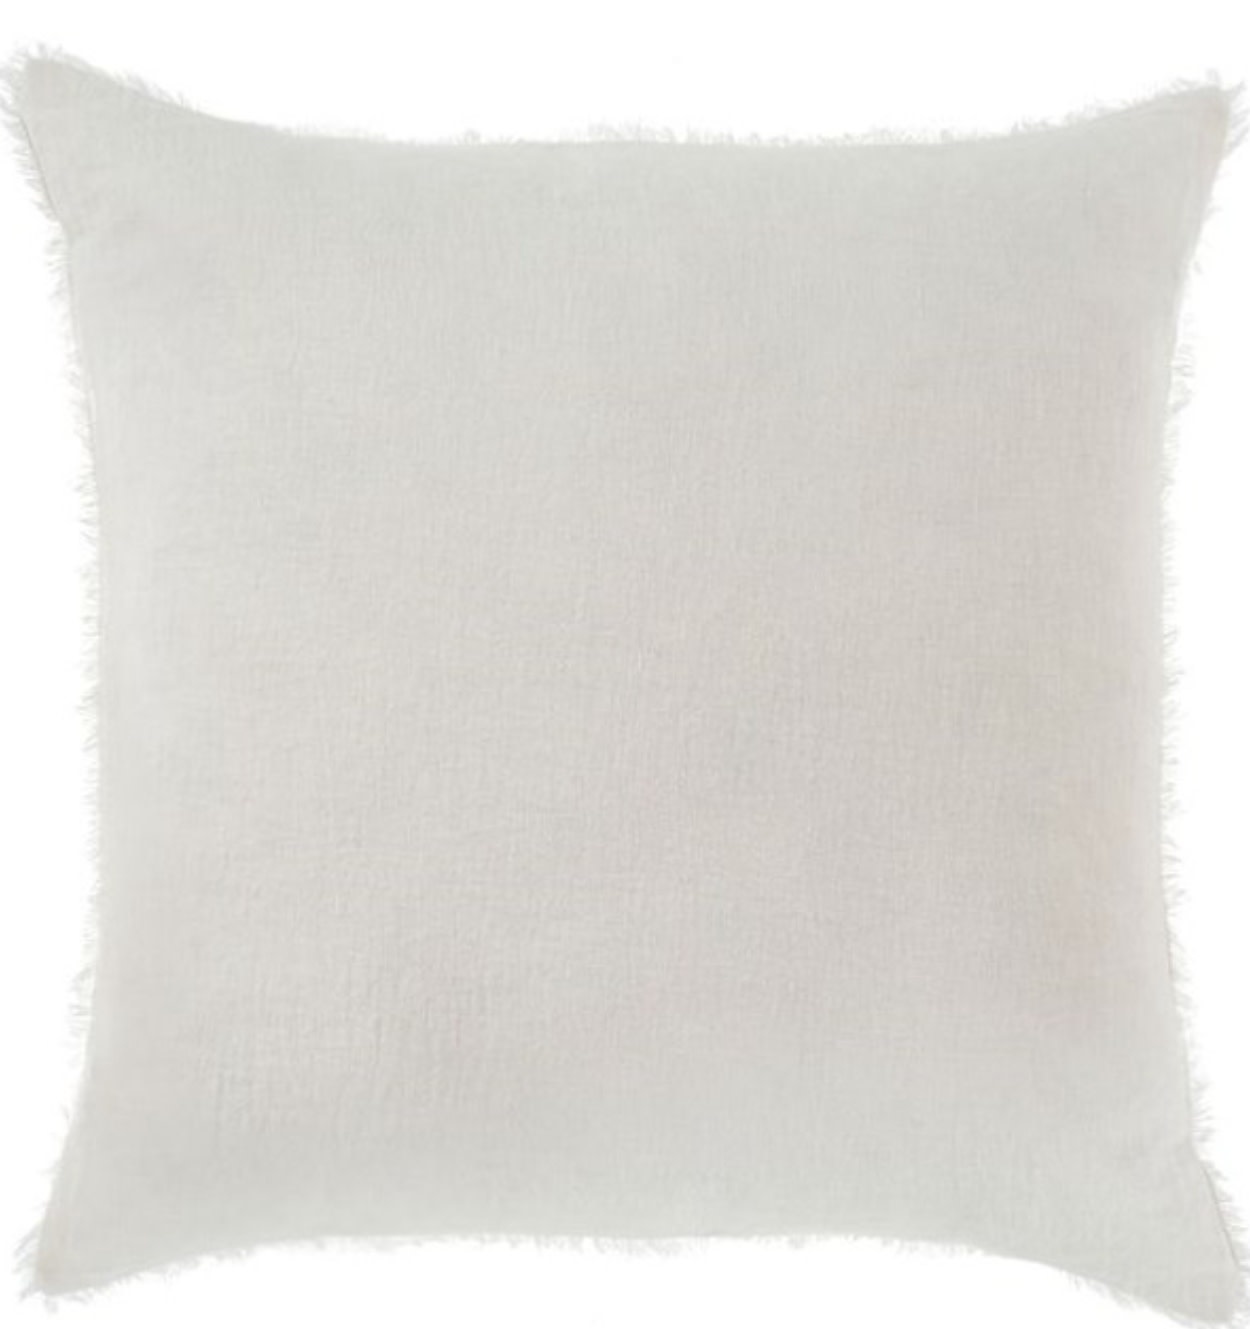 Lina Linen Pillow, White, 20 in. x 20 in.